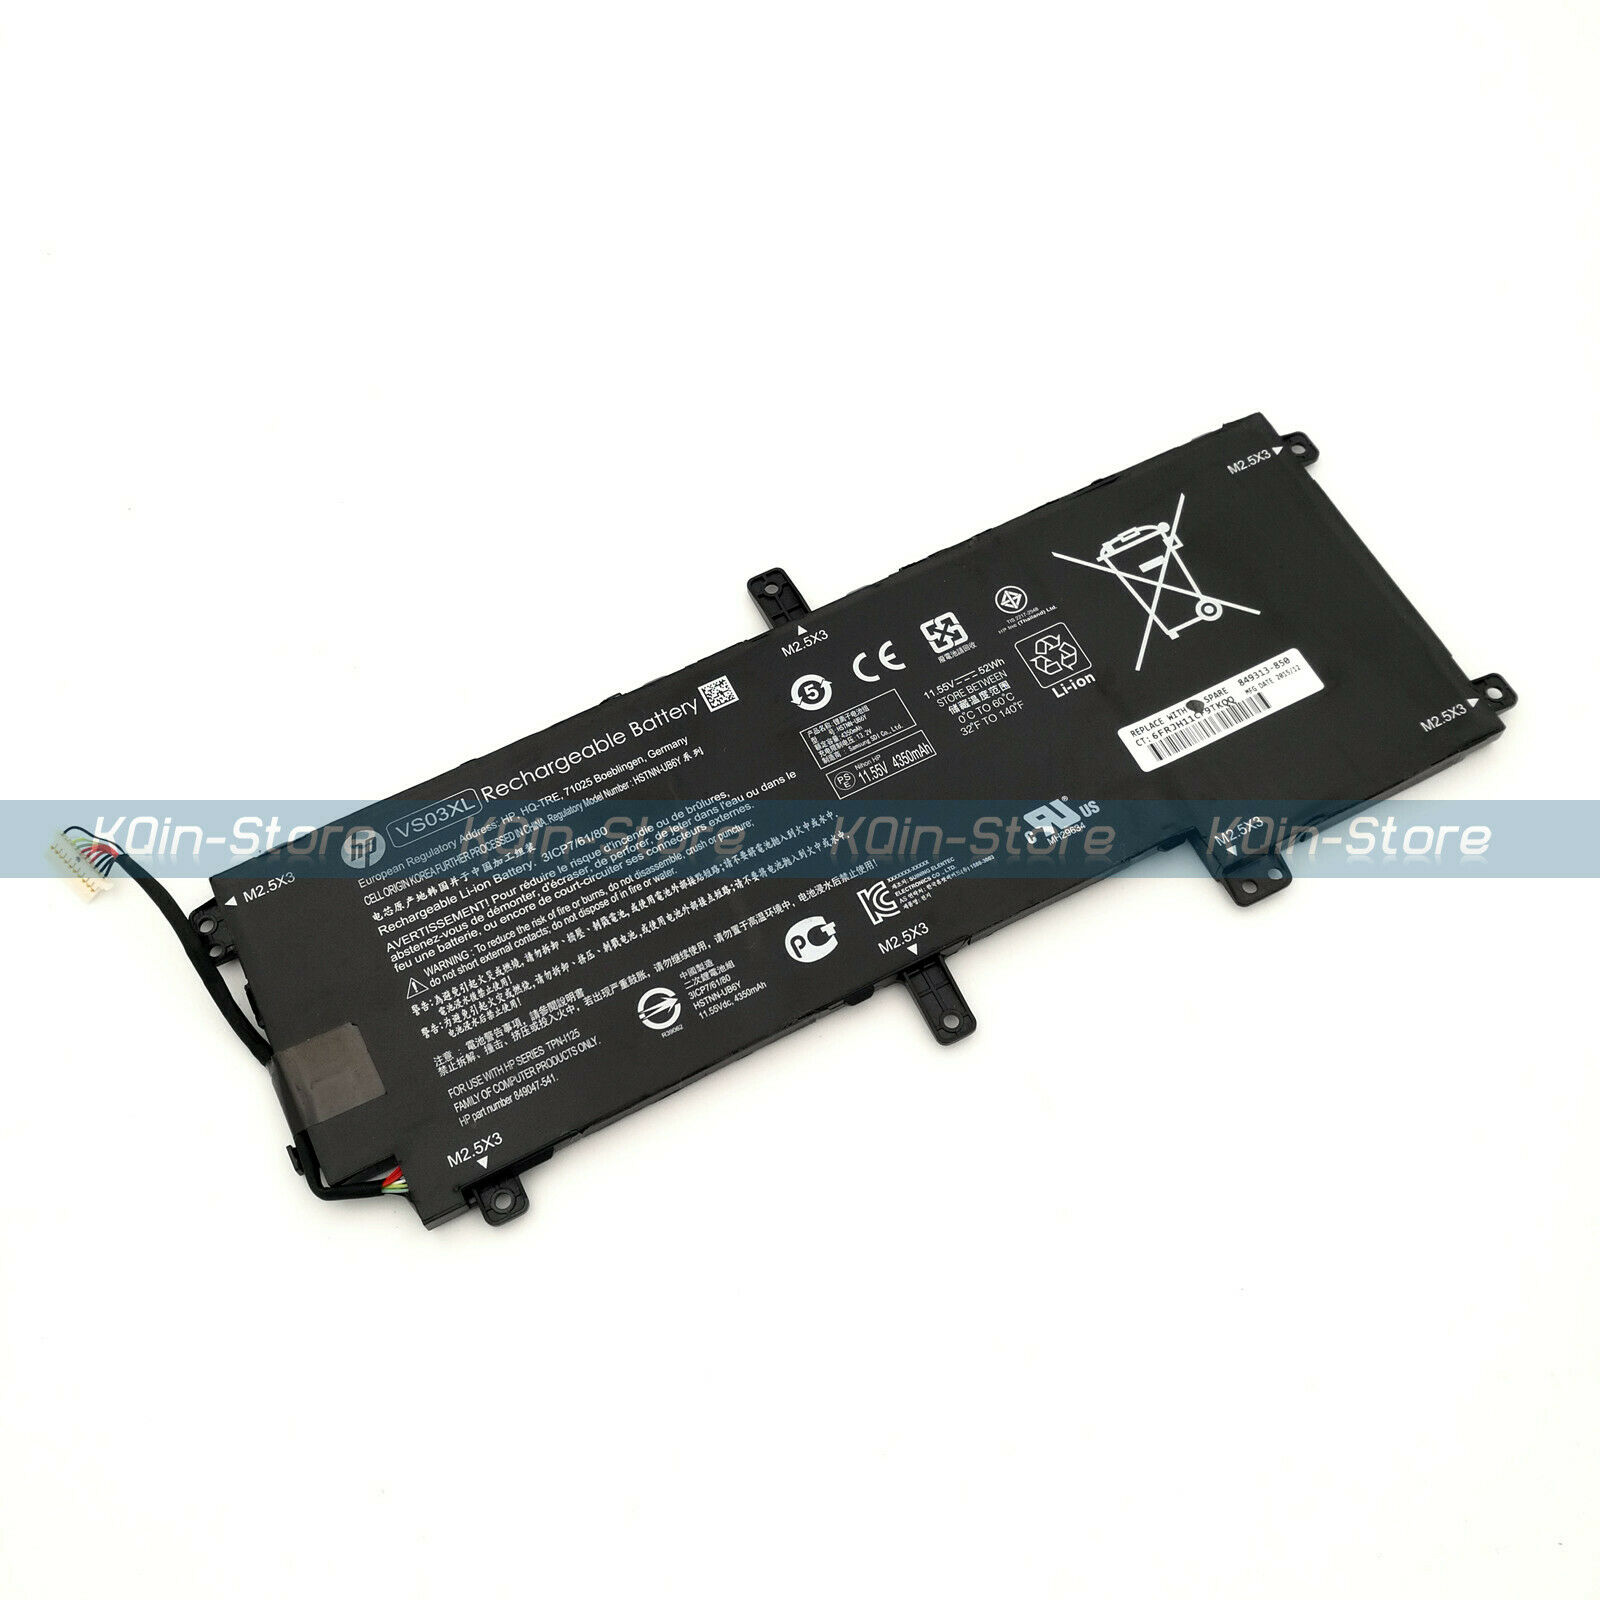 Genuine VS03XL Battery for HP Envy 15-AS 15-AS000 15-AS003 15-AS004 849313-850